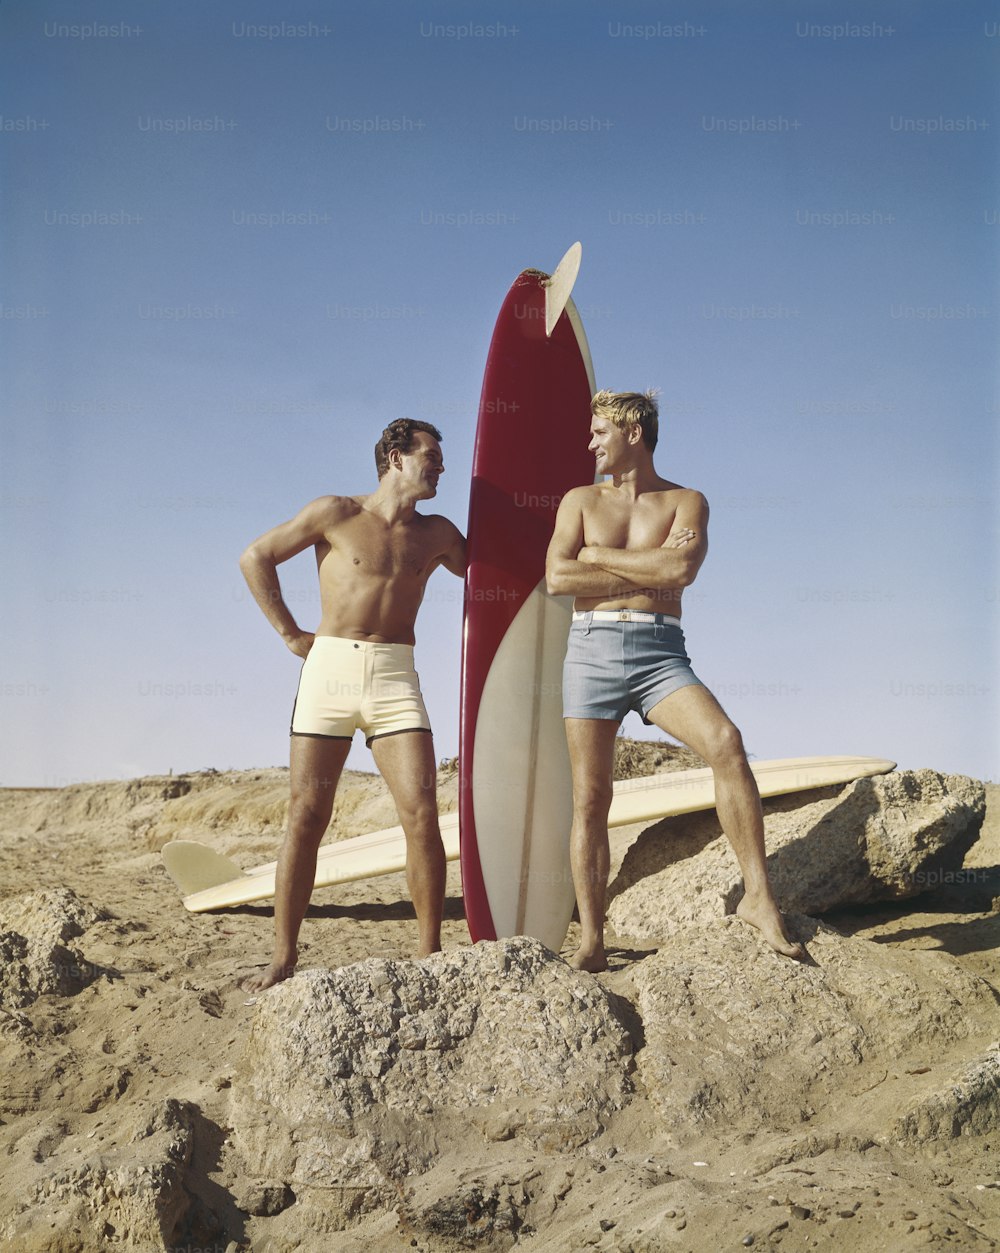 a couple of men standing next to a surfboard